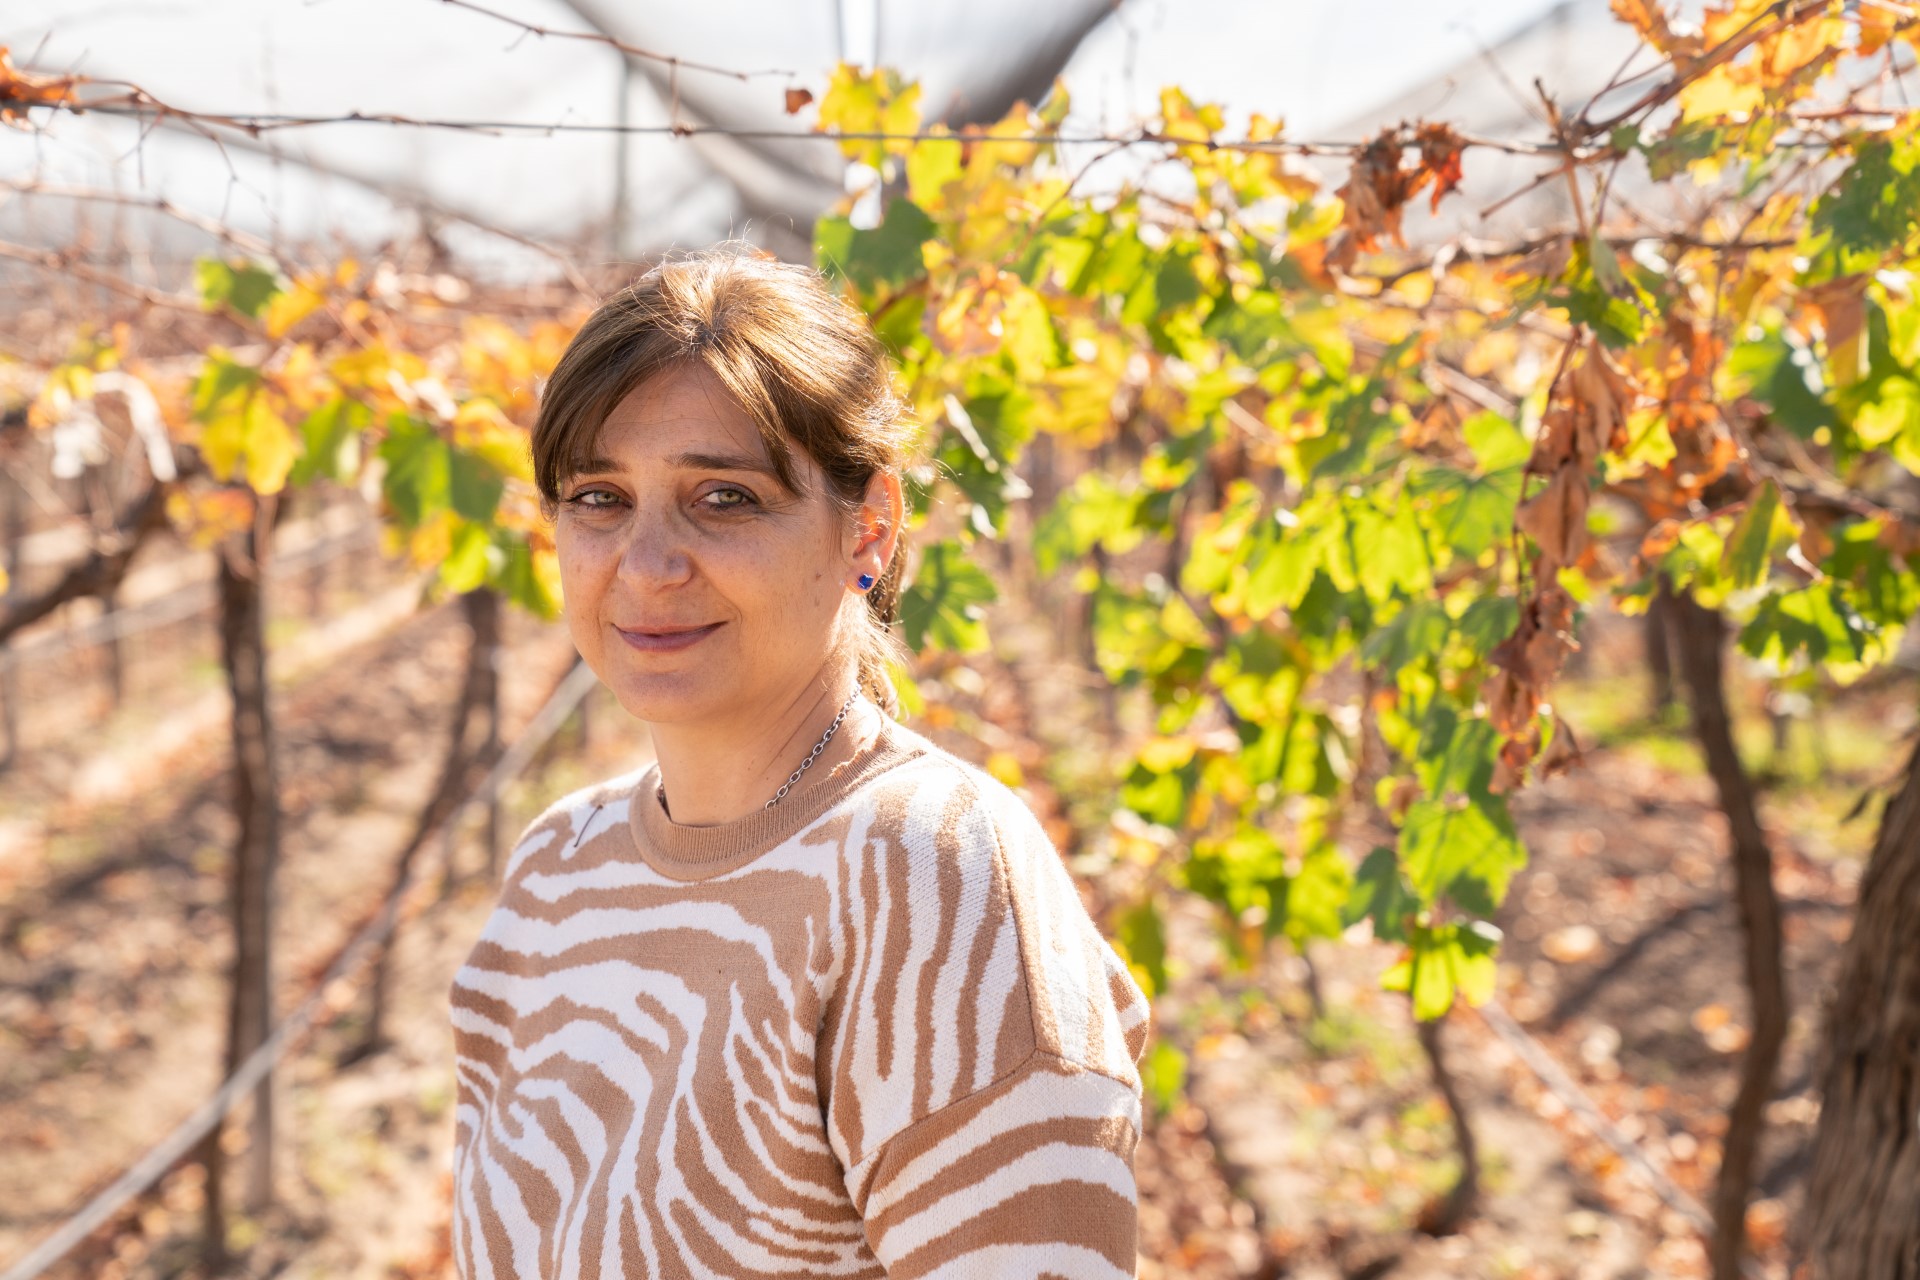 A woman smiles while standing in a vineyard